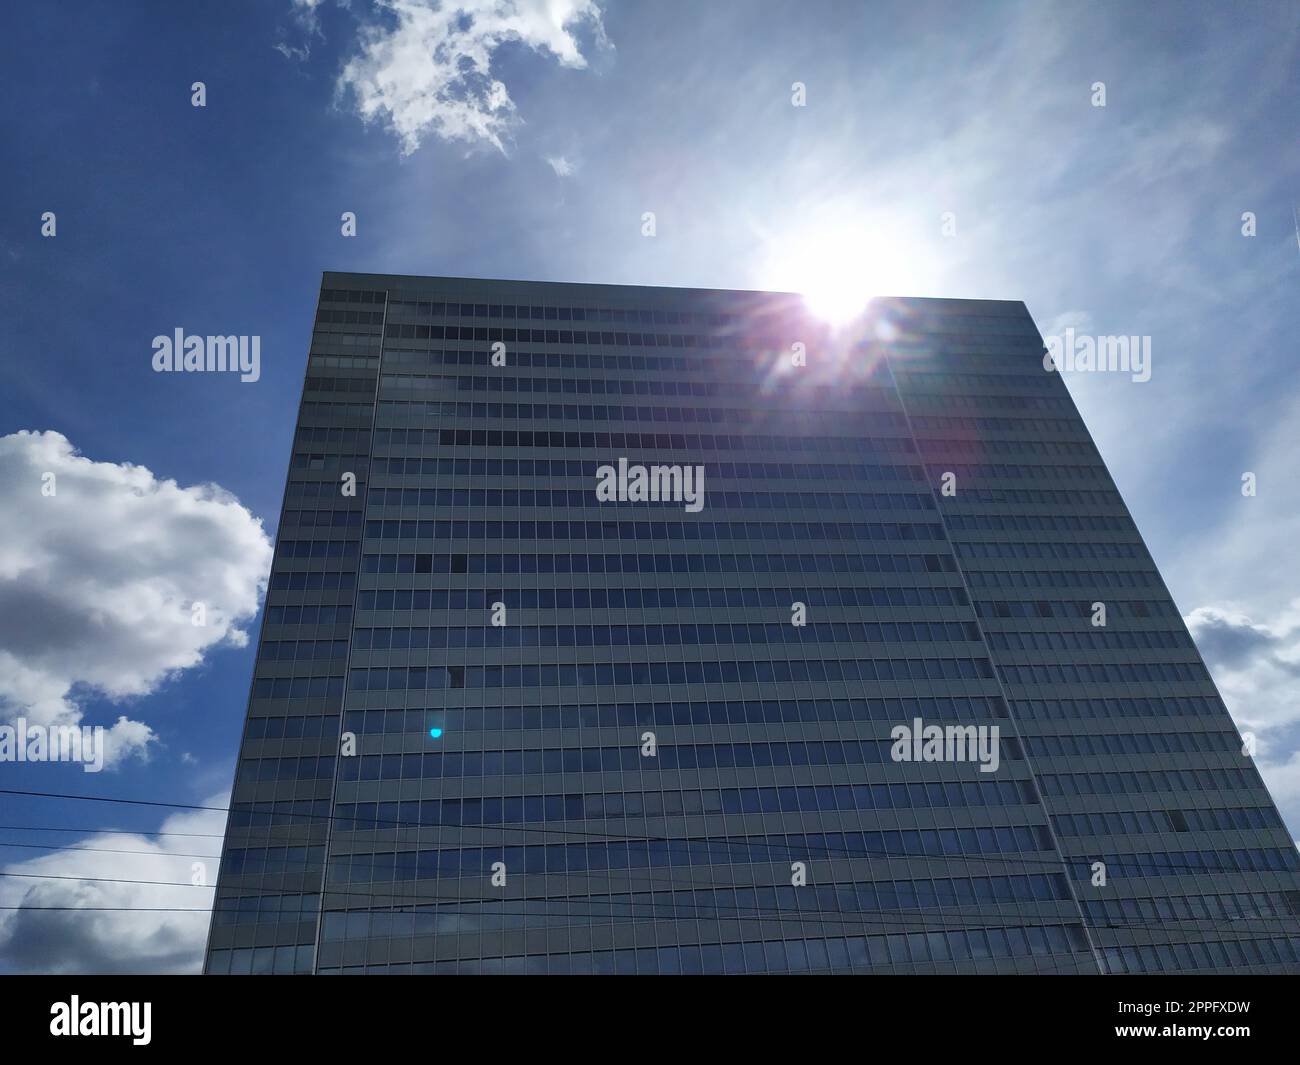 Dusseldorf, Germany - July 16th, 2022: High skyscraper Dreischeibenhaus from Thyssenkrupp in DÃ¼sseldorf as tall building in summer as contemporary architecture and clean glass facade blue sky clouds Stock Photo